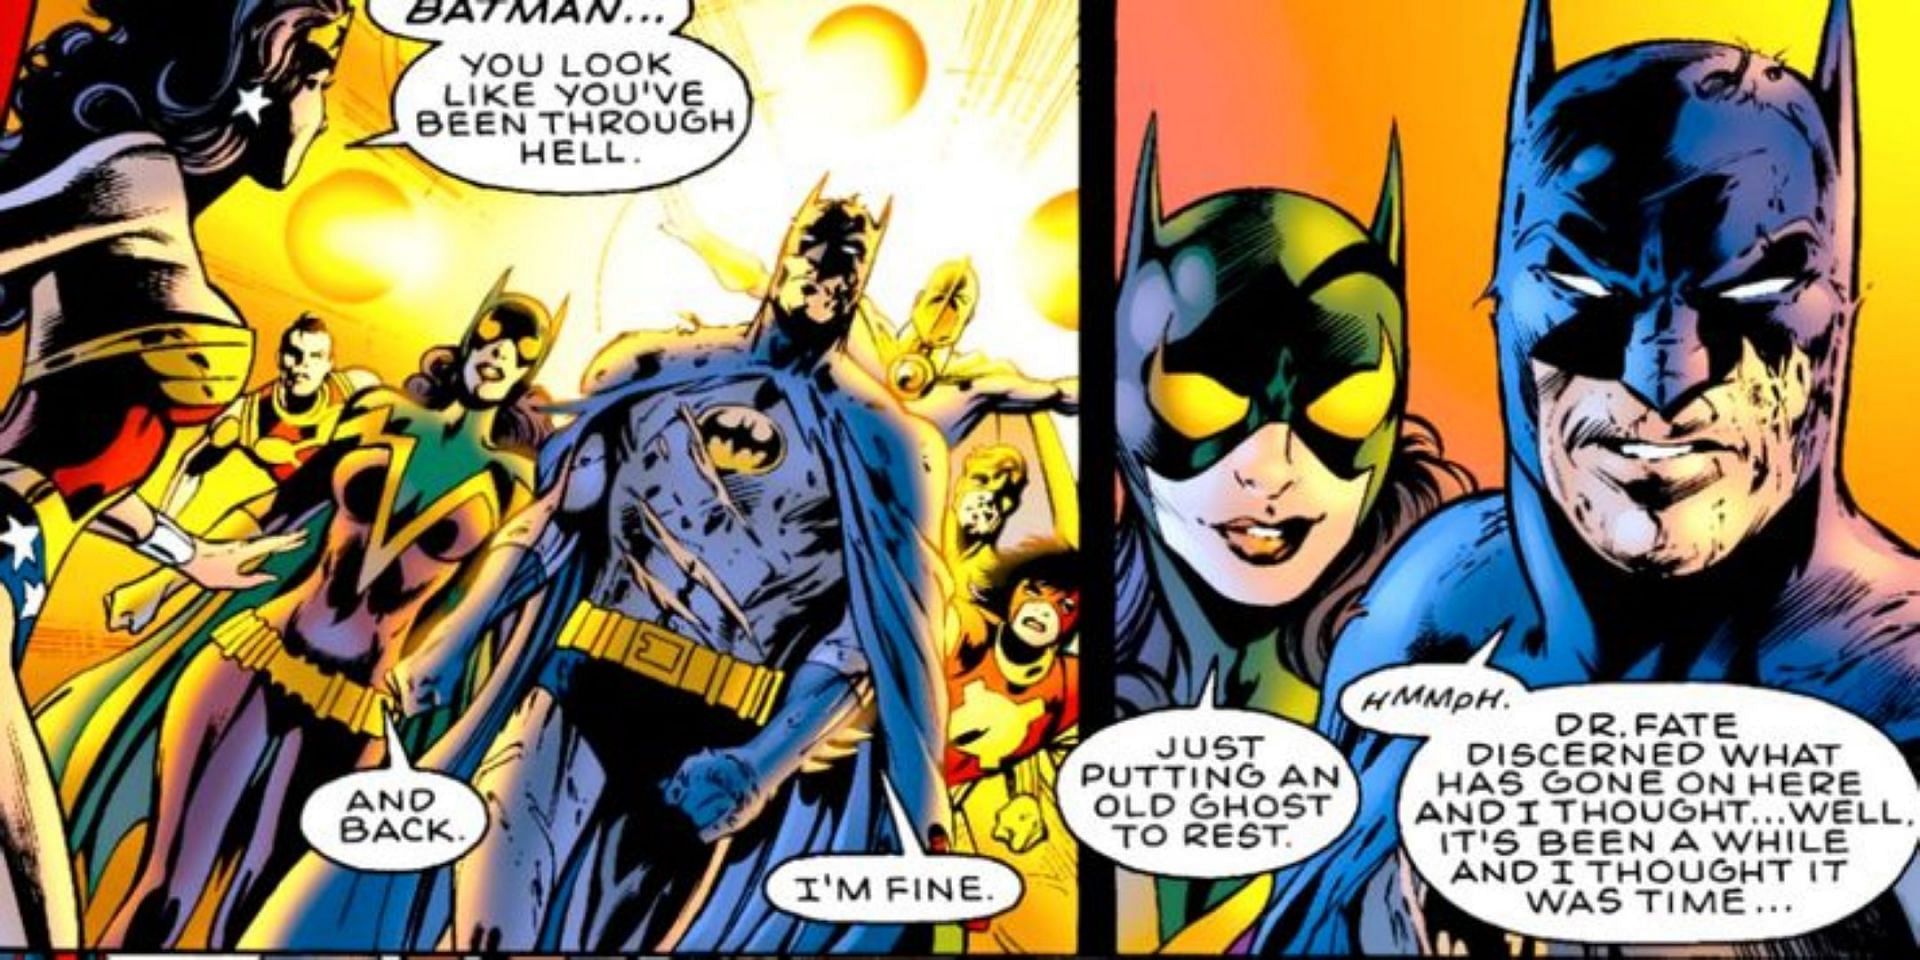 Selina Kyle became Batwoman to support Batman after the death of his allies (Image via DC)